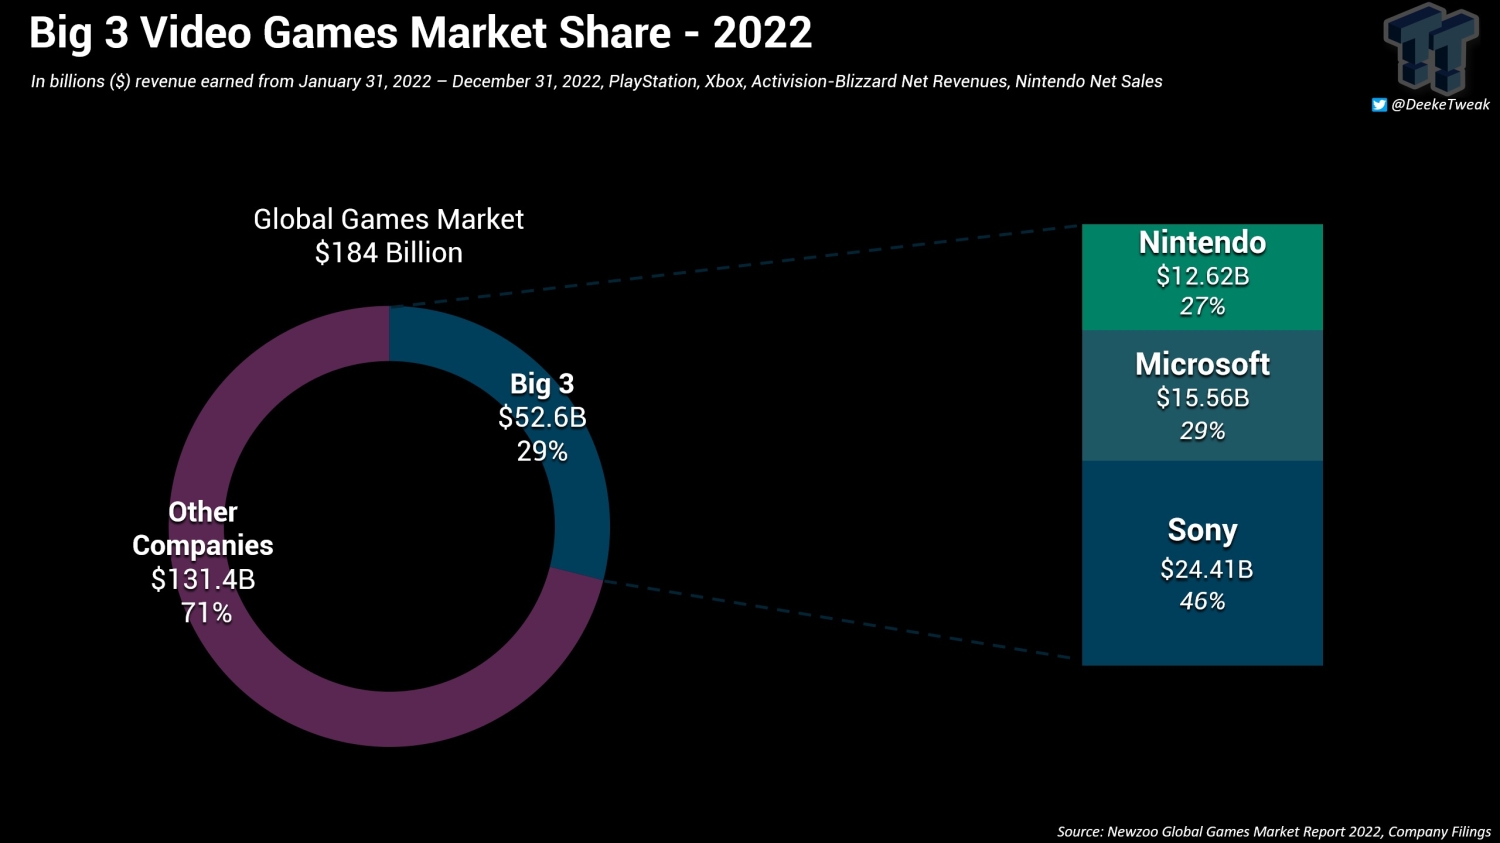 Big 3 market share: PlayStation, and slightly fluctuate 2022